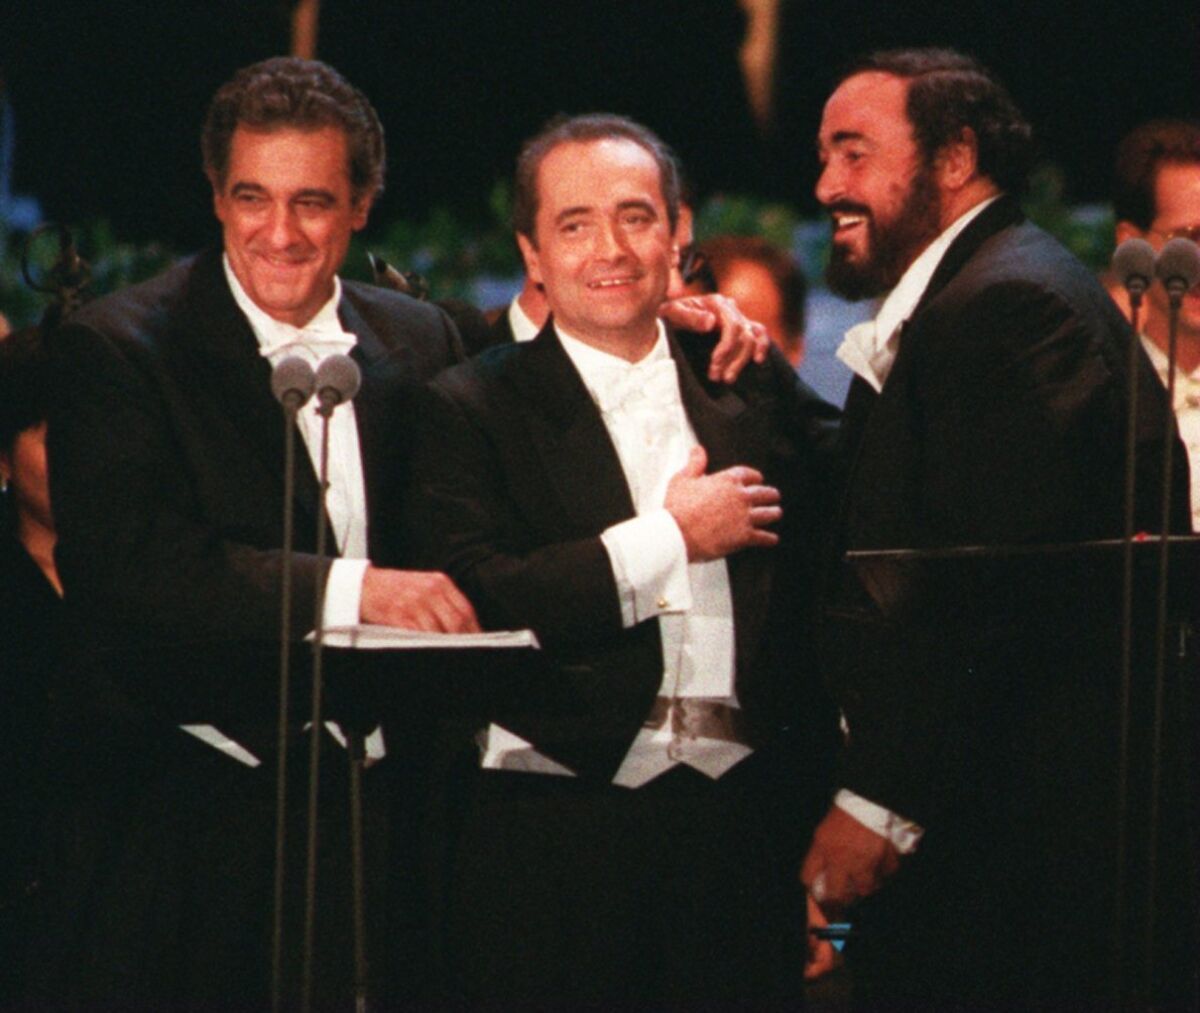 A look back at the Three Tenors concert at Dodger Stadium Los Angeles